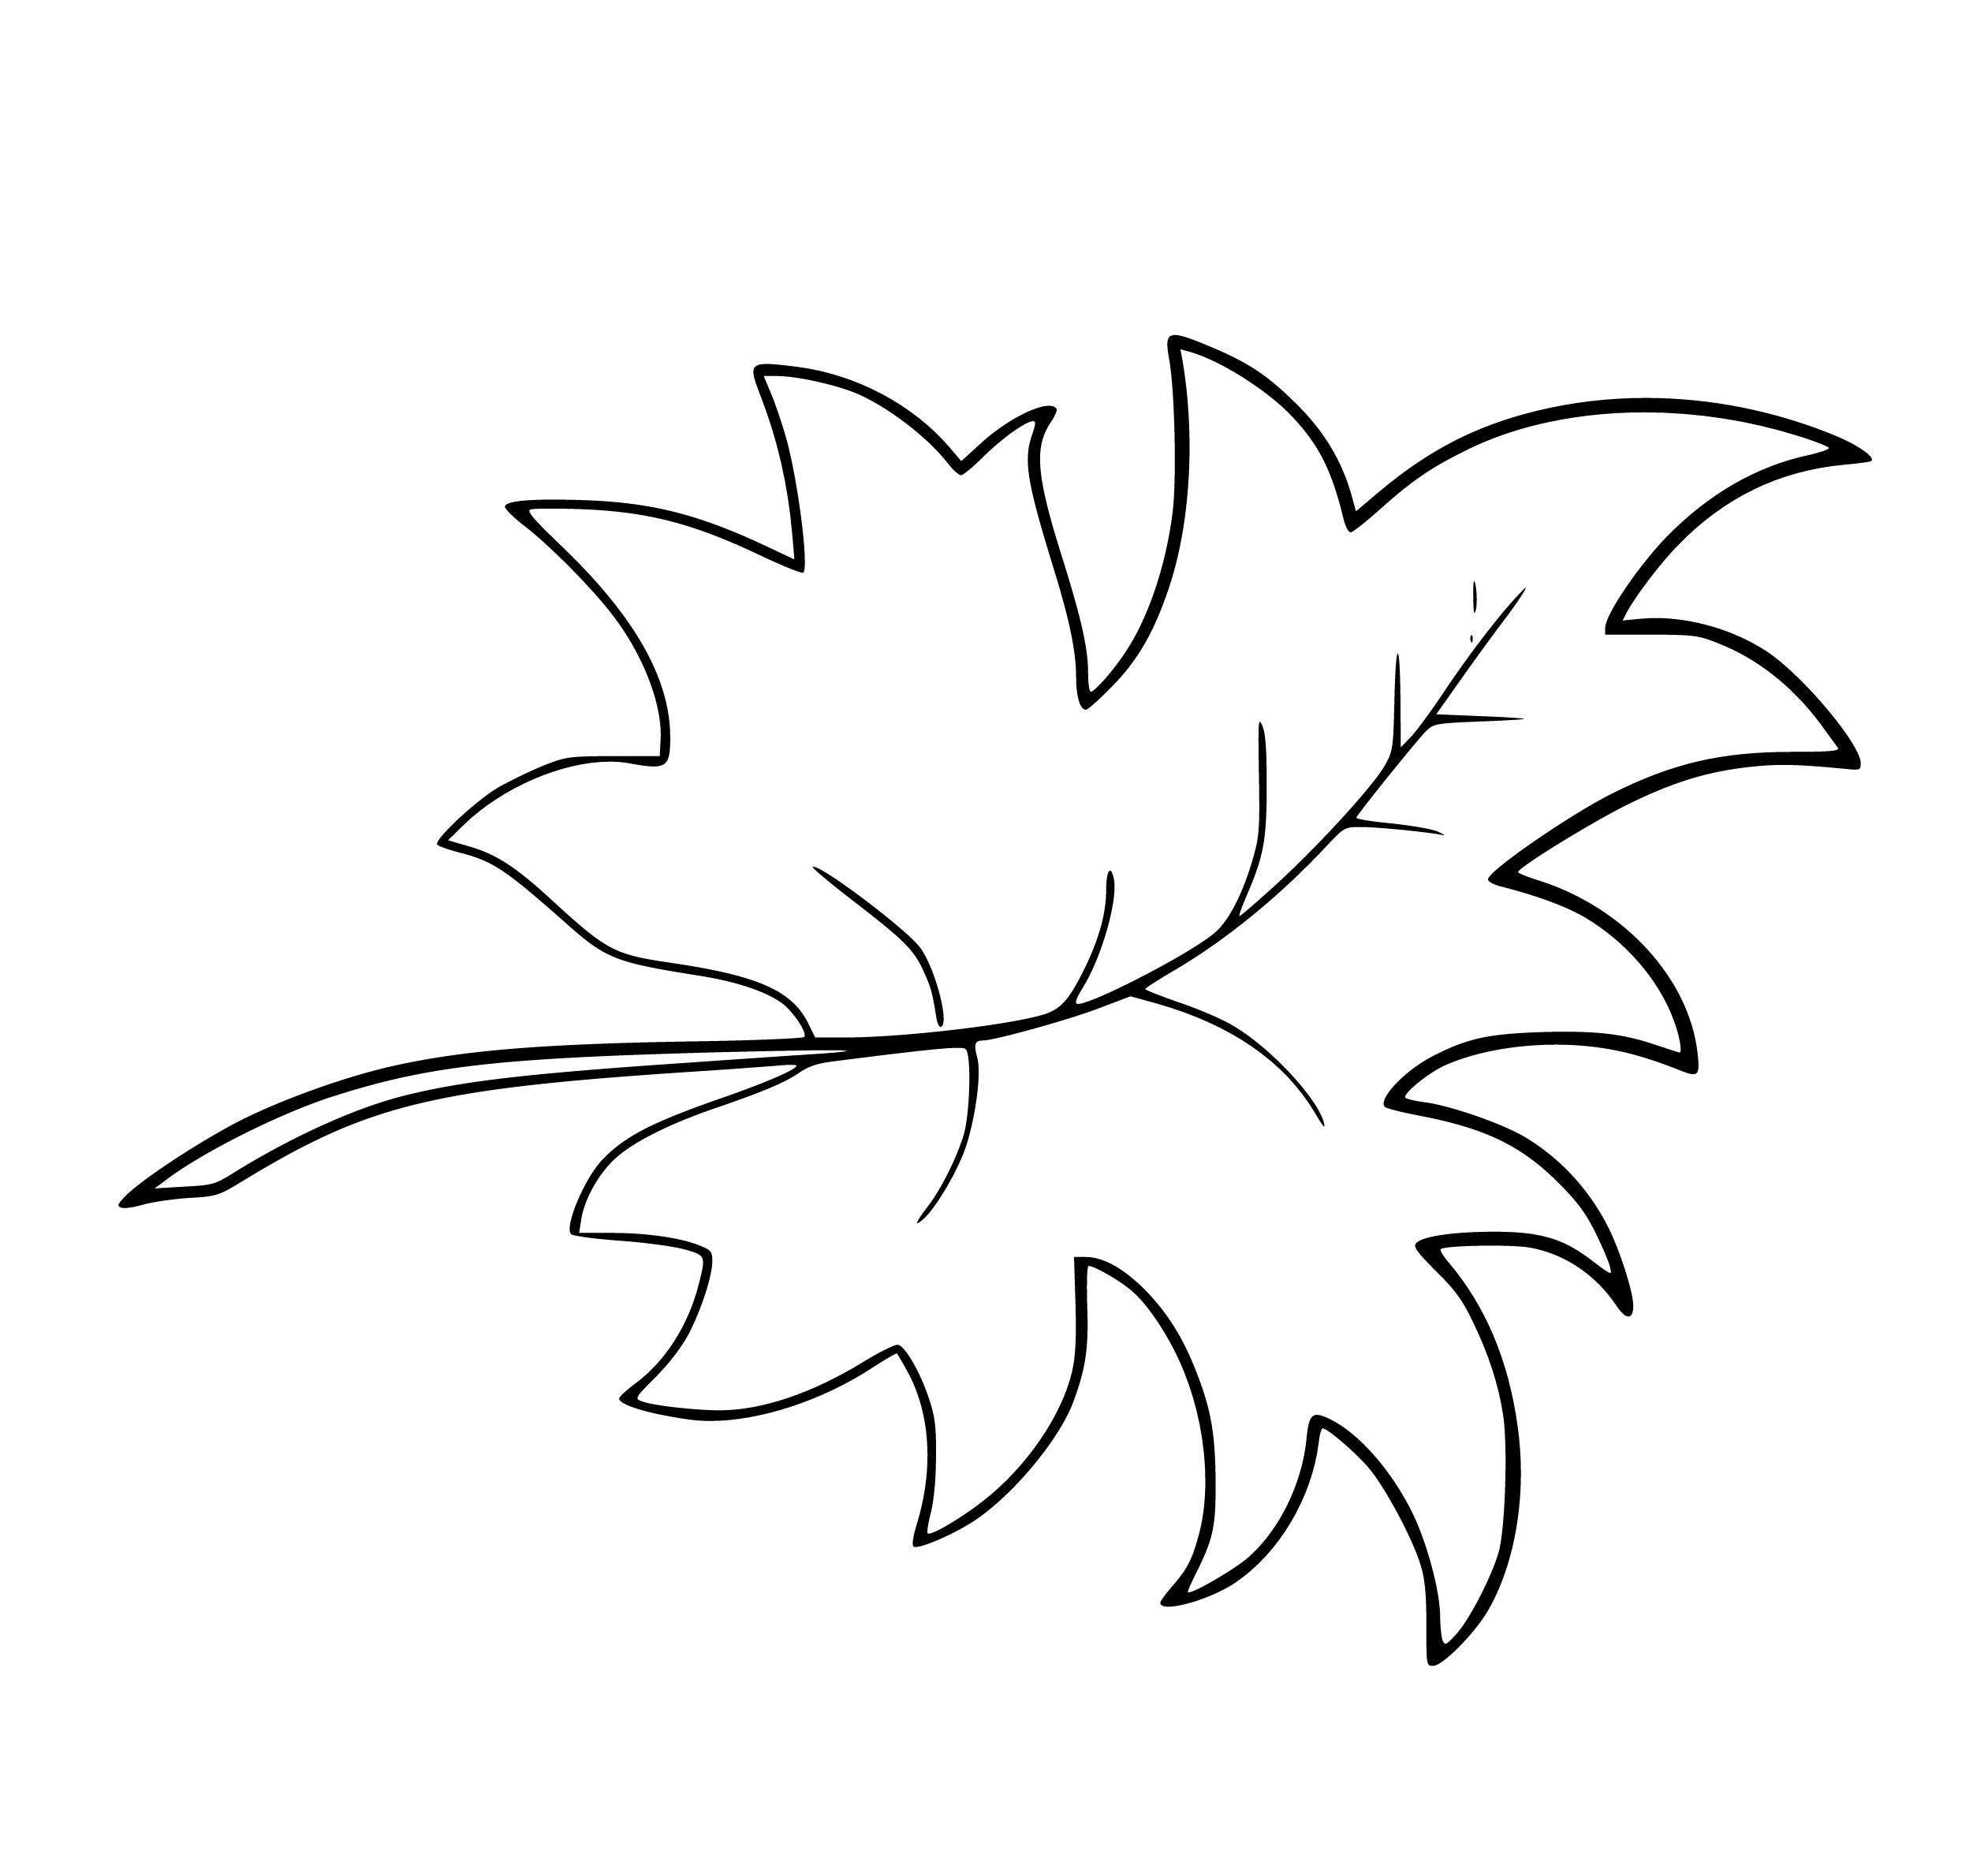 Leaf Coloring Pages 5